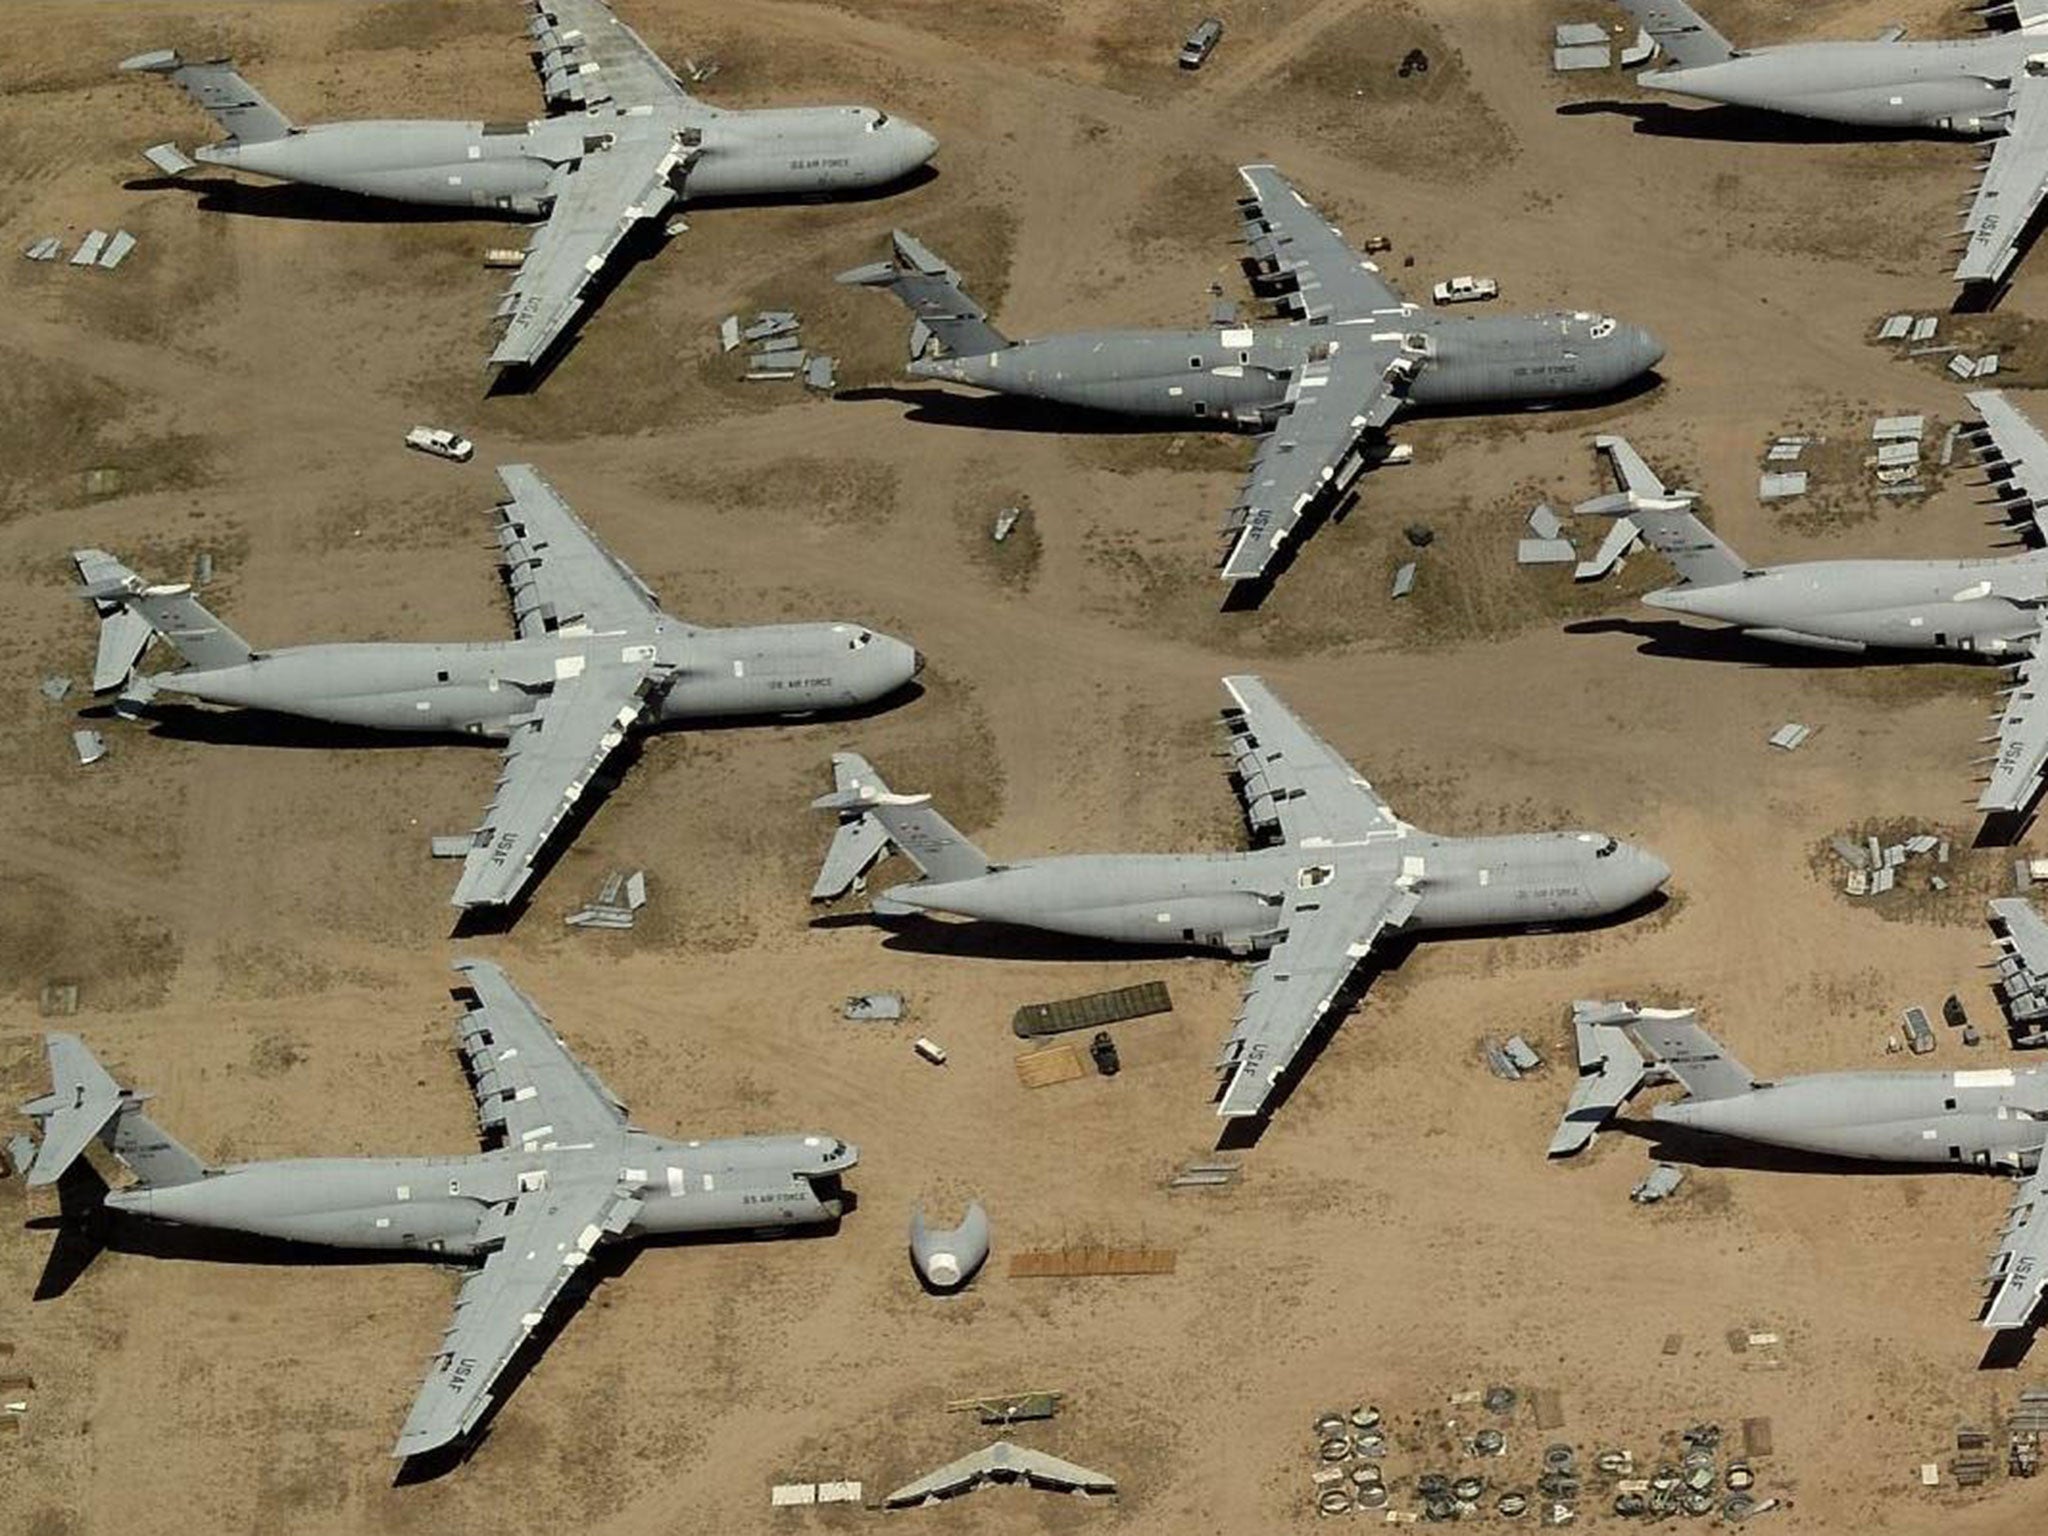 World's largest plane graveyard of US military fighters in desert can now  be explored online in amazing interactive map | The Independent | The  Independent